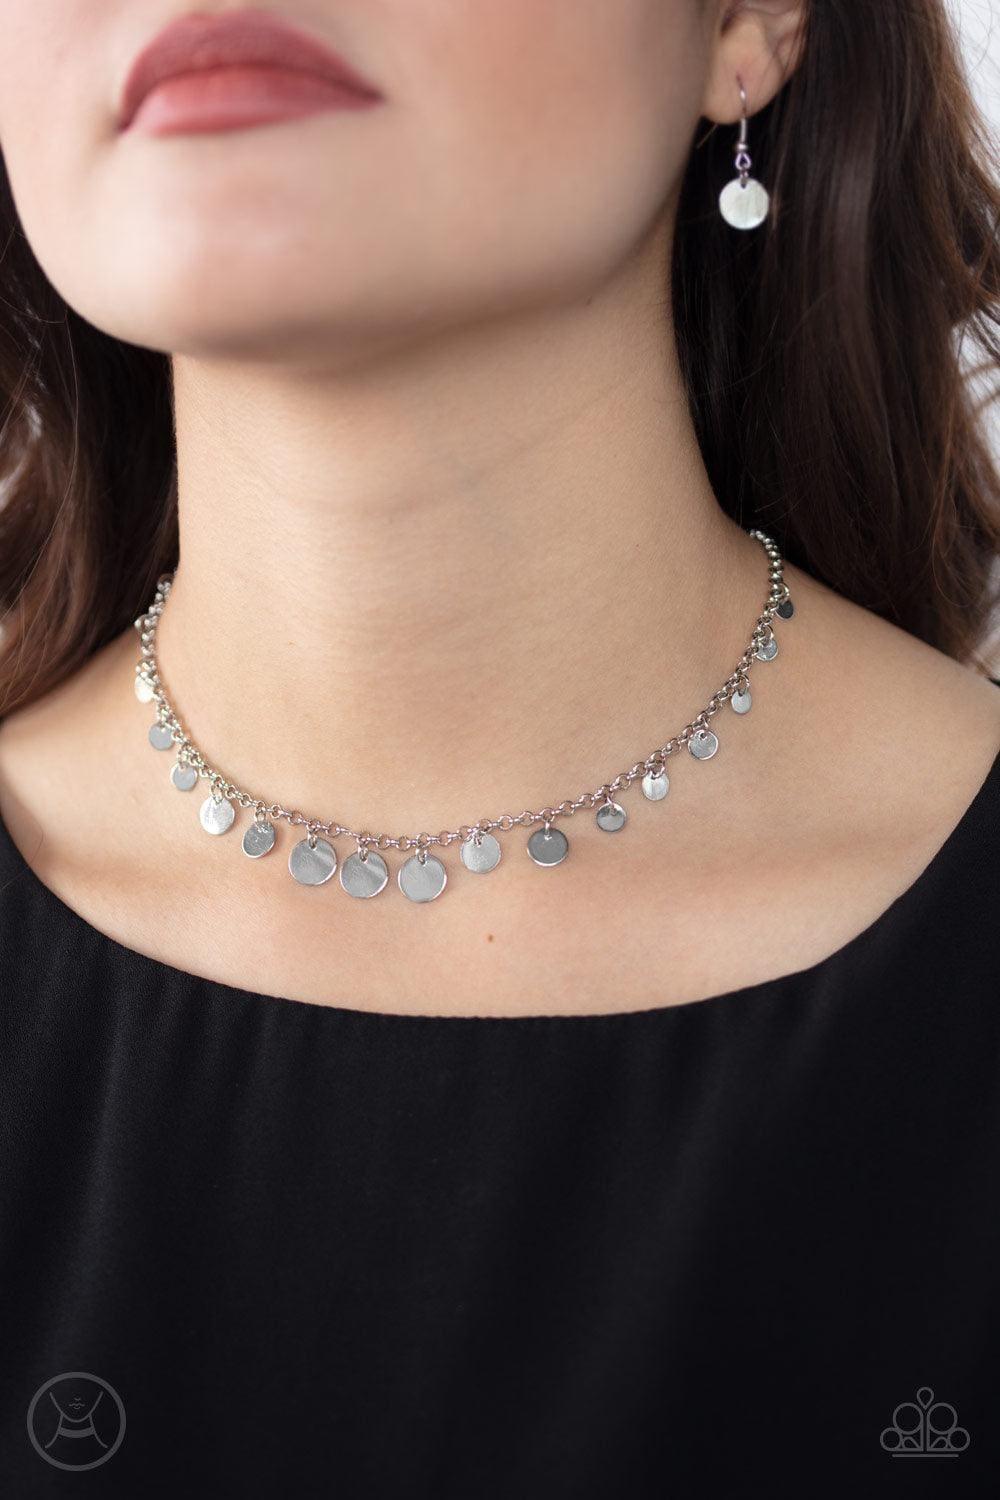 Paparazzi Accessories - Minimal Magic - Silver Choker Necklace - Bling by JessieK